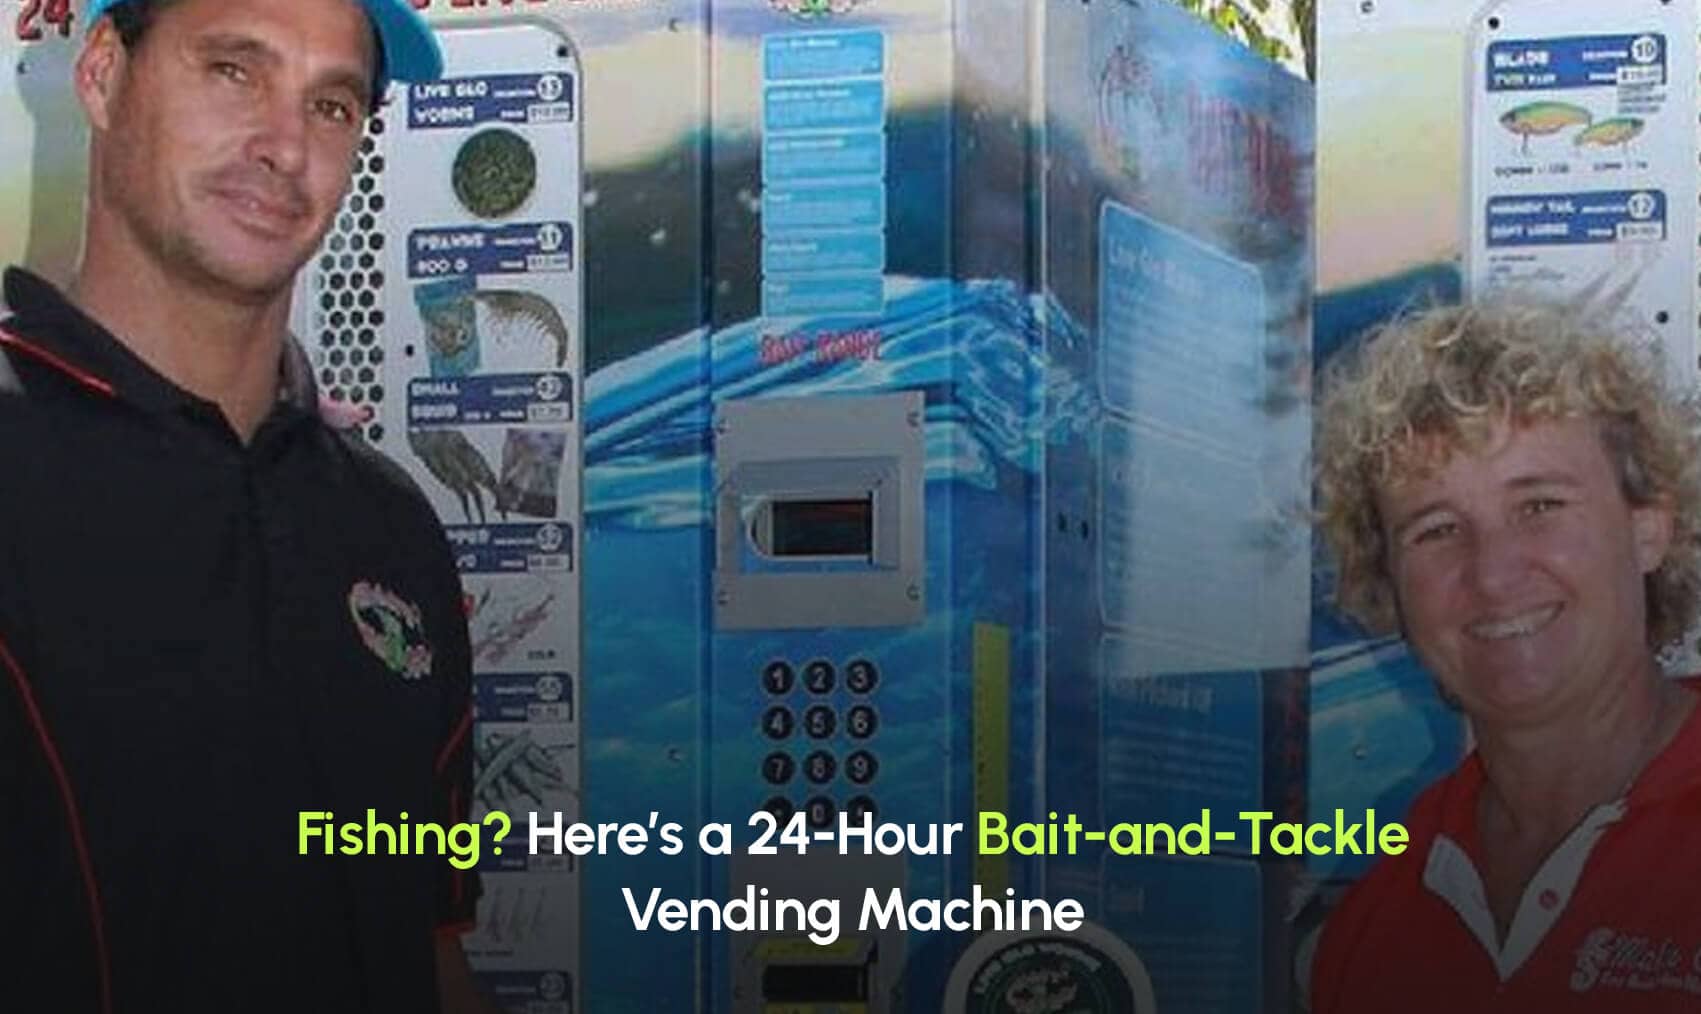 Fishing? Here's a 24-Hour Bait-and-Tackle Vending Machine